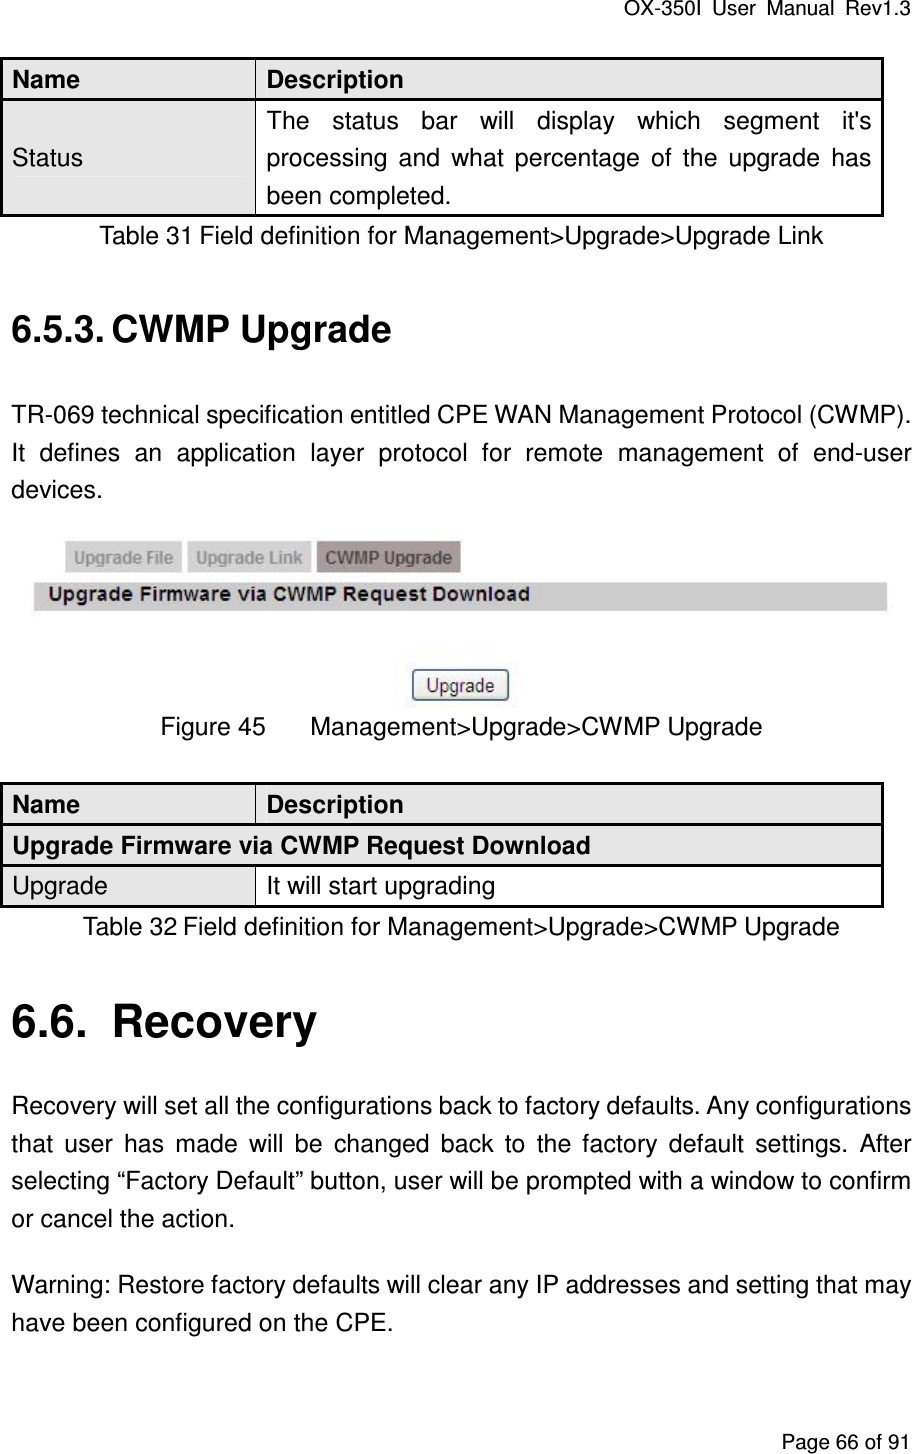 OX-350I  User  Manual  Rev1.3 Page 66 of 91 Name  Description Status The  status  bar  will  display  which  segment  it&apos;s processing  and  what  percentage  of  the  upgrade  has been completed. Table 31 Field definition for Management&gt;Upgrade&gt;Upgrade Link 6.5.3. CWMP Upgrade TR-069 technical specification entitled CPE WAN Management Protocol (CWMP). It  defines  an  application  layer  protocol  for  remote  management  of  end-user devices.  Figure 45  Management&gt;Upgrade&gt;CWMP Upgrade Name  Description Upgrade Firmware via CWMP Request Download Upgrade  It will start upgrading Table 32 Field definition for Management&gt;Upgrade&gt;CWMP Upgrade 6.6.  Recovery Recovery will set all the configurations back to factory defaults. Any configurations that  user  has  made  will  be  changed  back  to  the  factory  default  settings.  After selecting “Factory Default” button, user will be prompted with a window to confirm or cancel the action. Warning: Restore factory defaults will clear any IP addresses and setting that may have been configured on the CPE. 